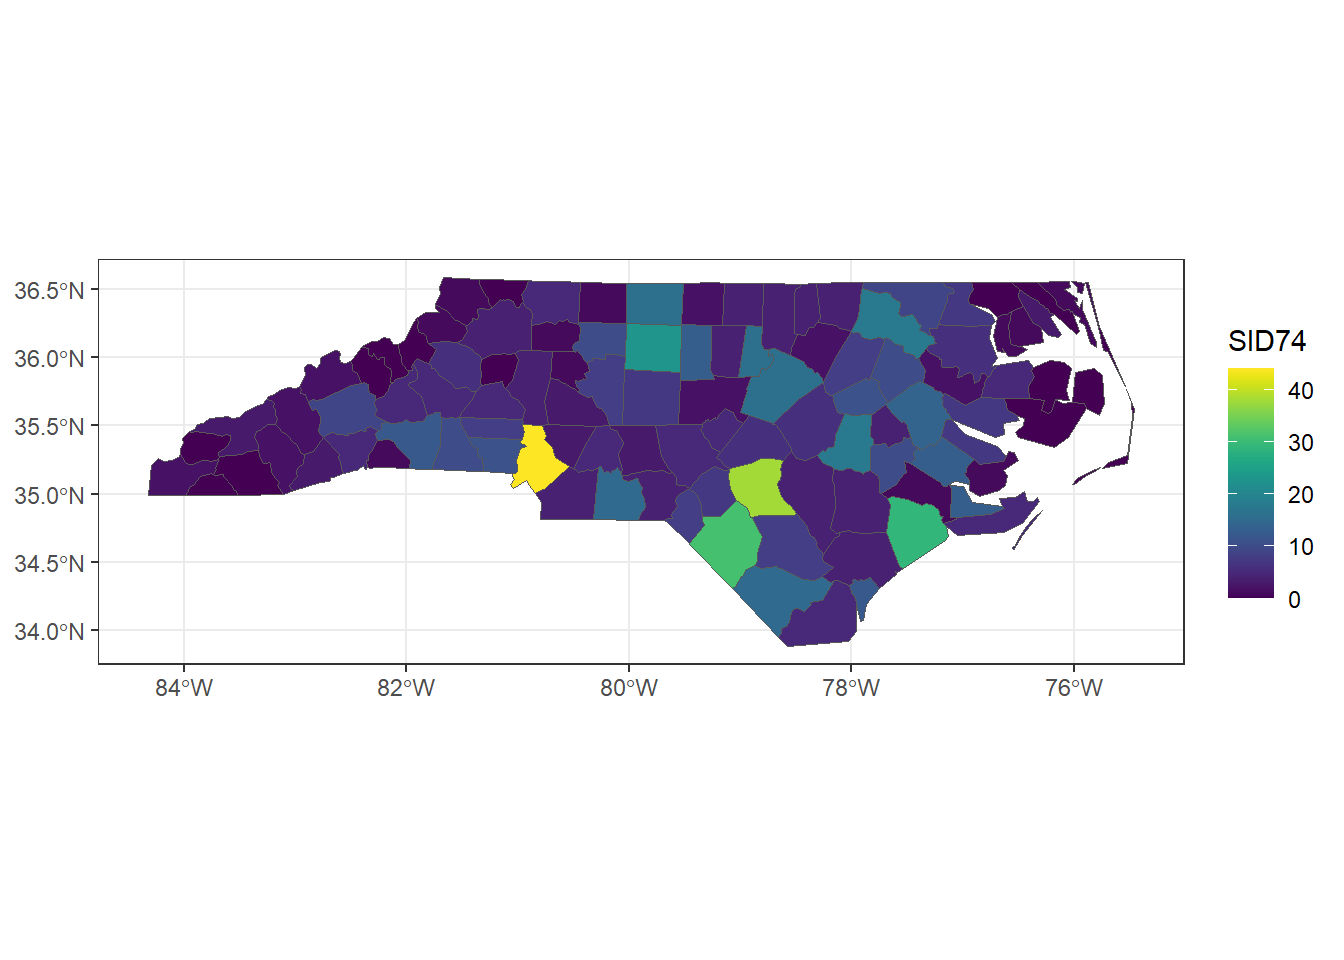 Map of sudden infant deaths in North Carolina in 1974, created with **ggplot2** and viridis scale.